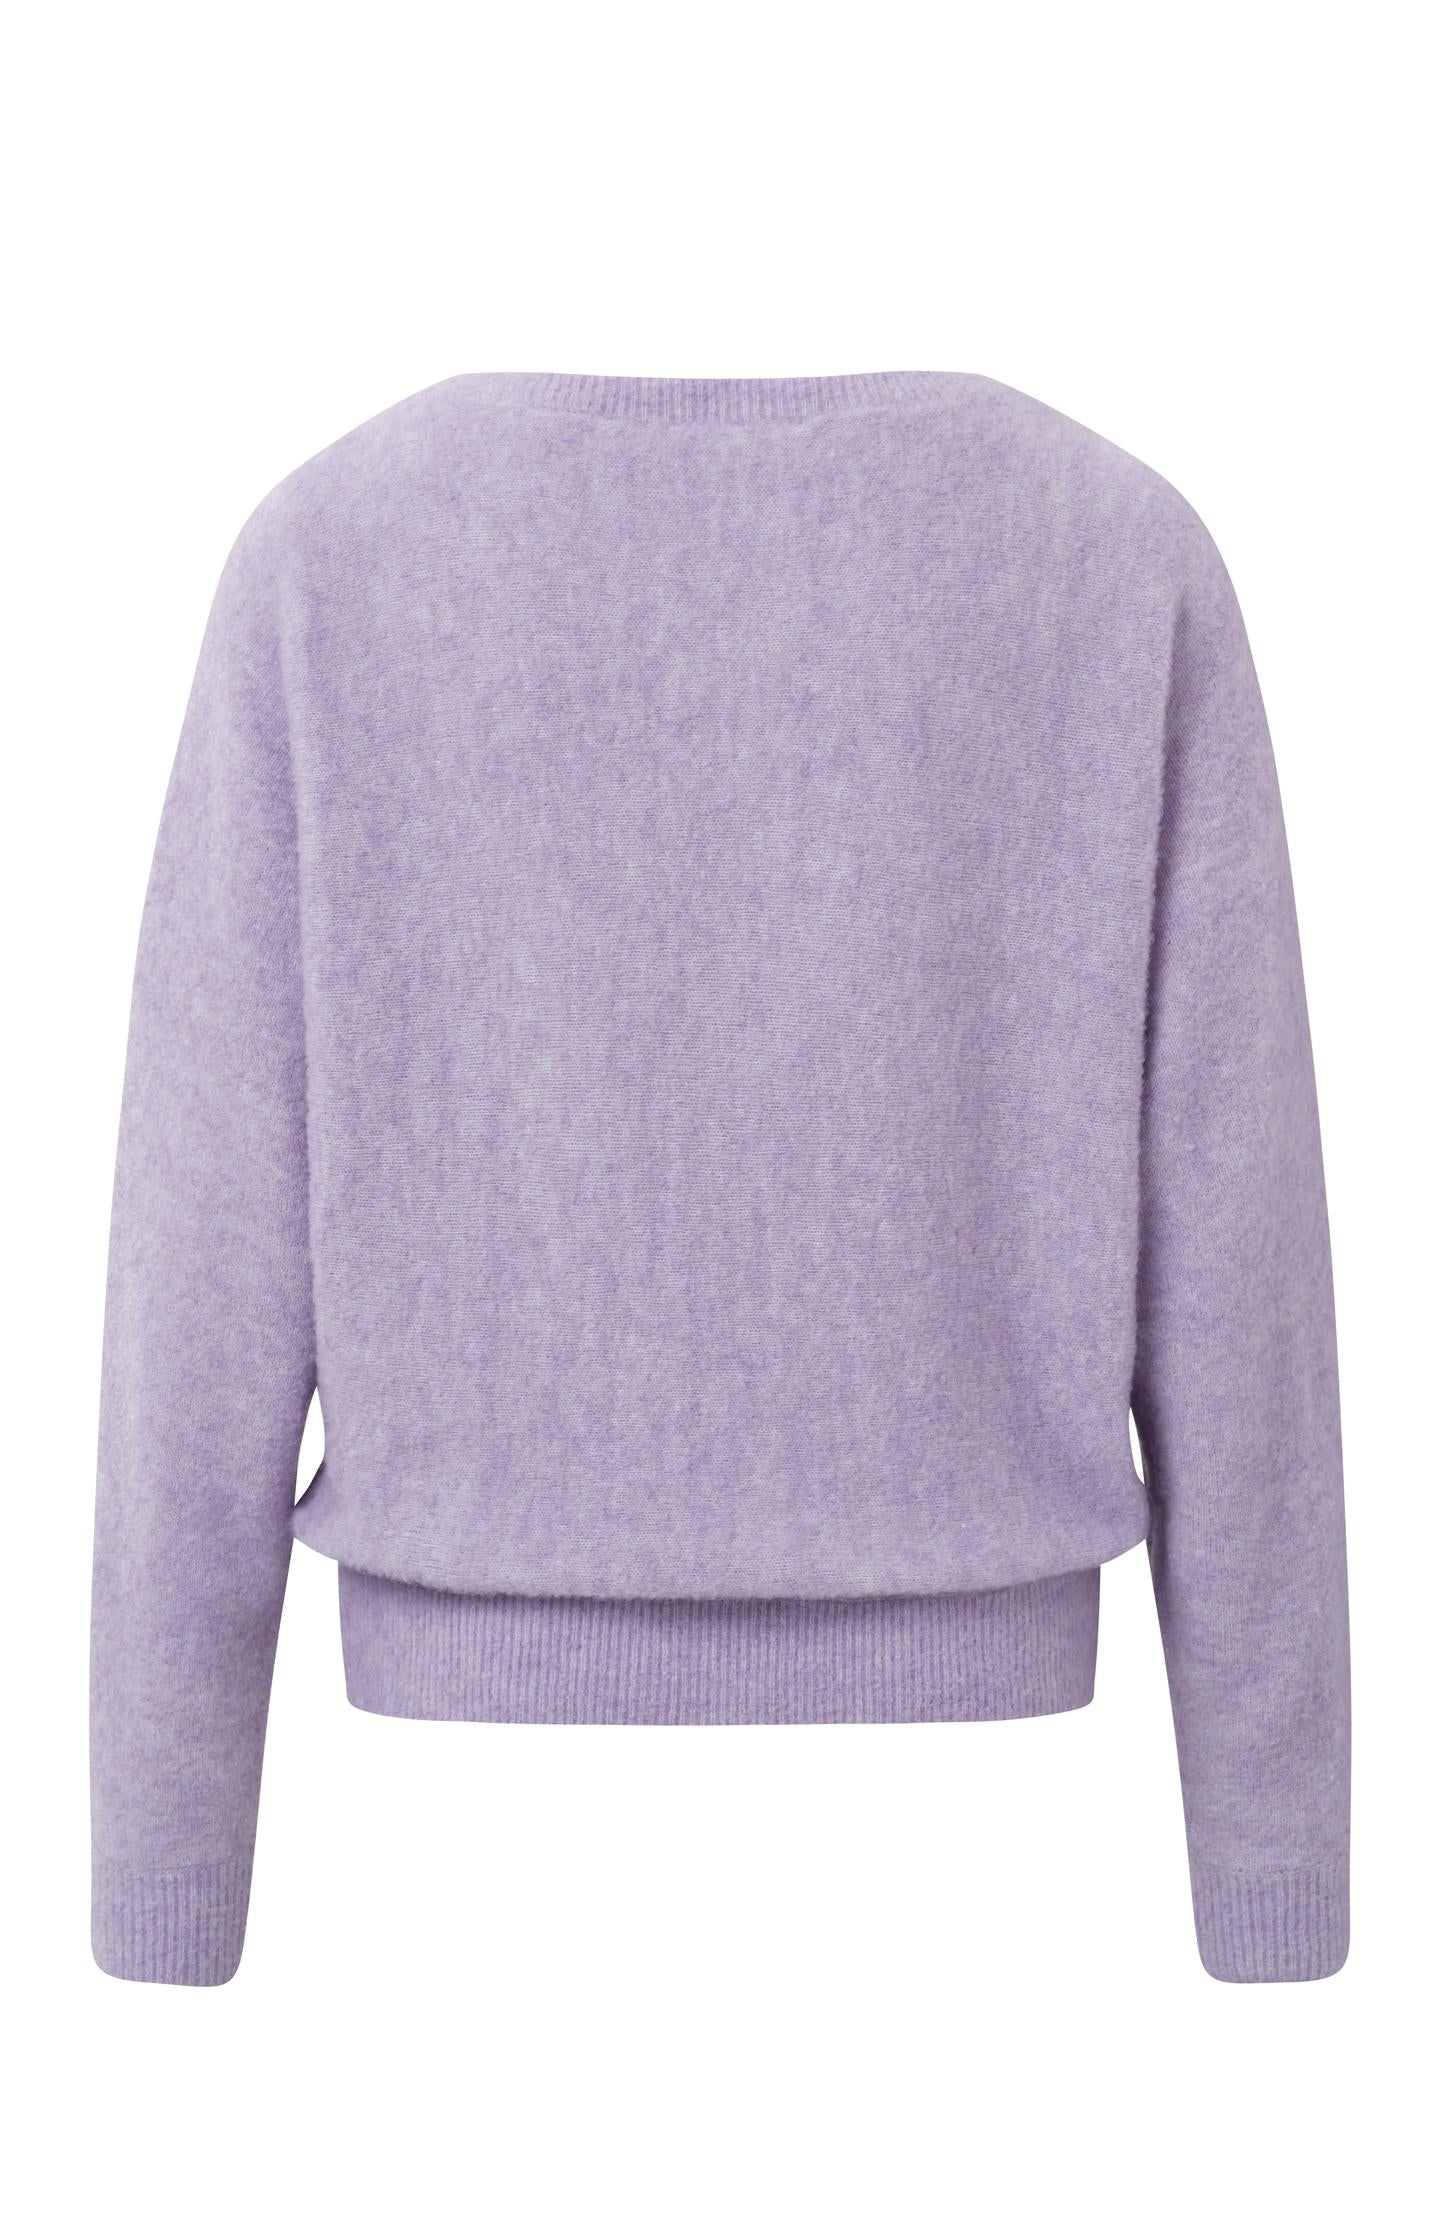 Boatneck sweater with long sleeves and a seam detail